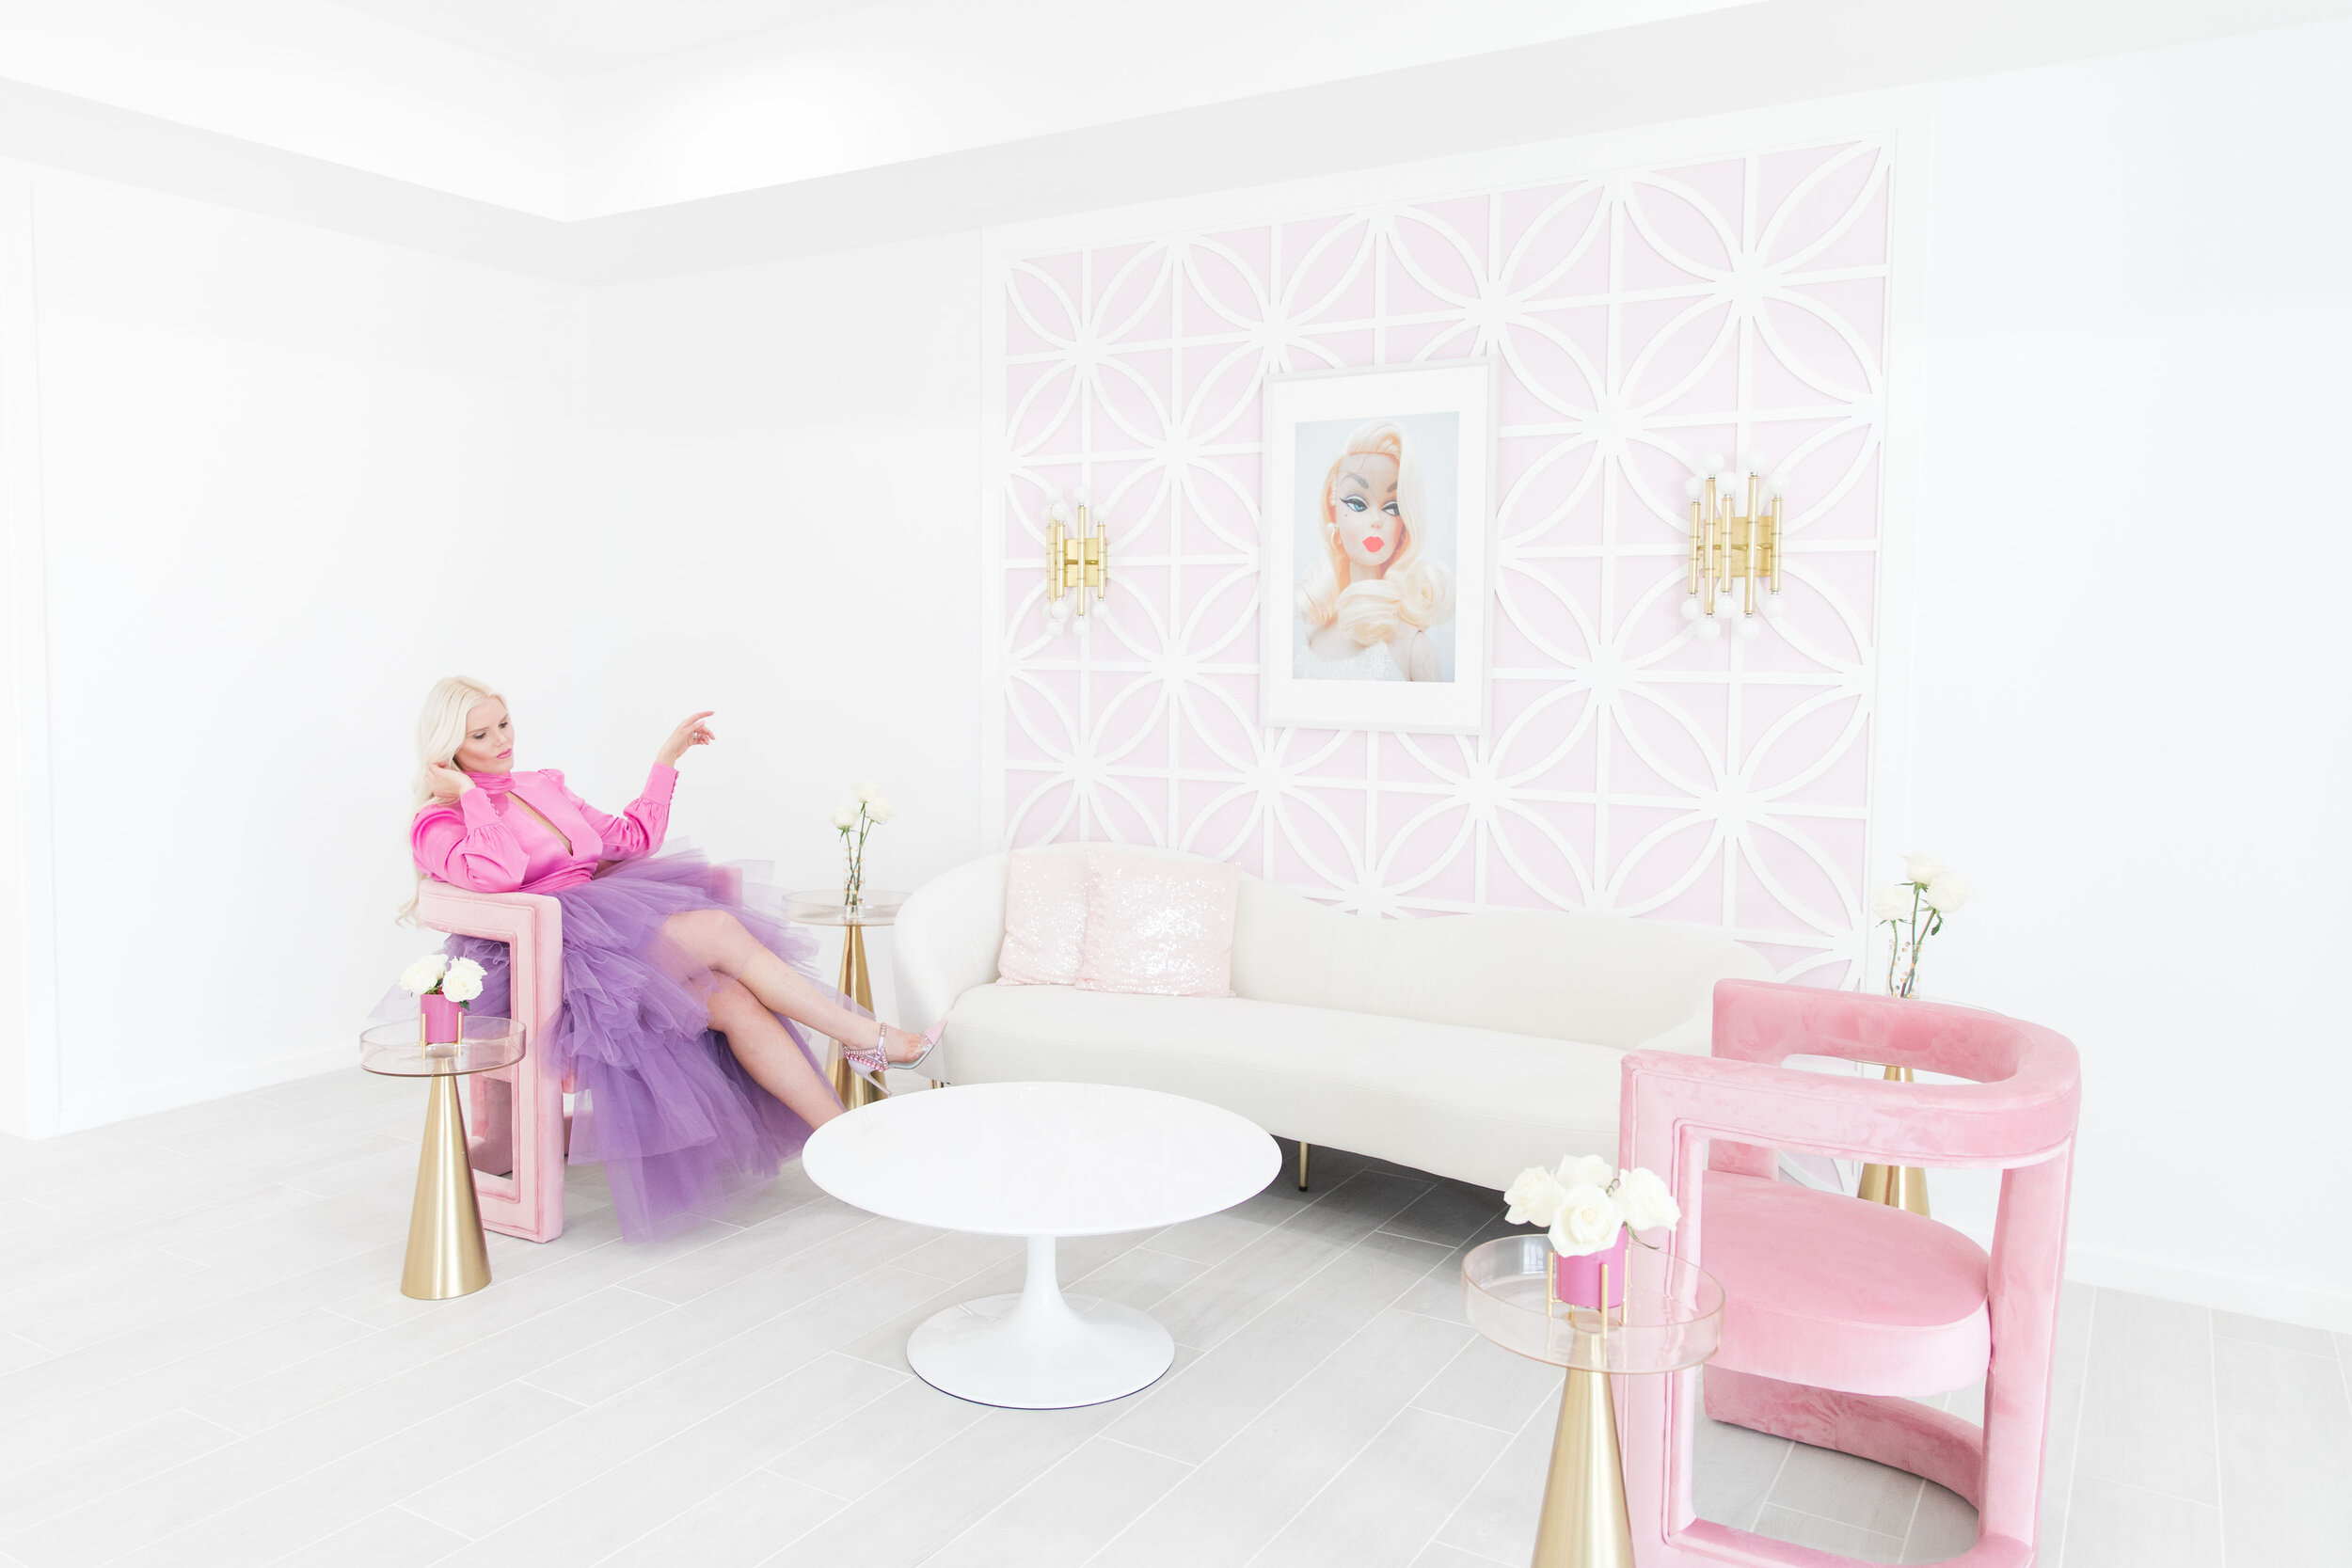 POSH-PR-The-Caroline-Doll-Barbie-Office-Pink-Style-Boss-Goals-At-Home-Workspace-Luxury-Fashion-Infused-Office-The-Doll-HQ-TV-Set-Vintage-Barbie-Style-Modern-Chic-Design-Gold-And-Pink-Decor-4.jpg